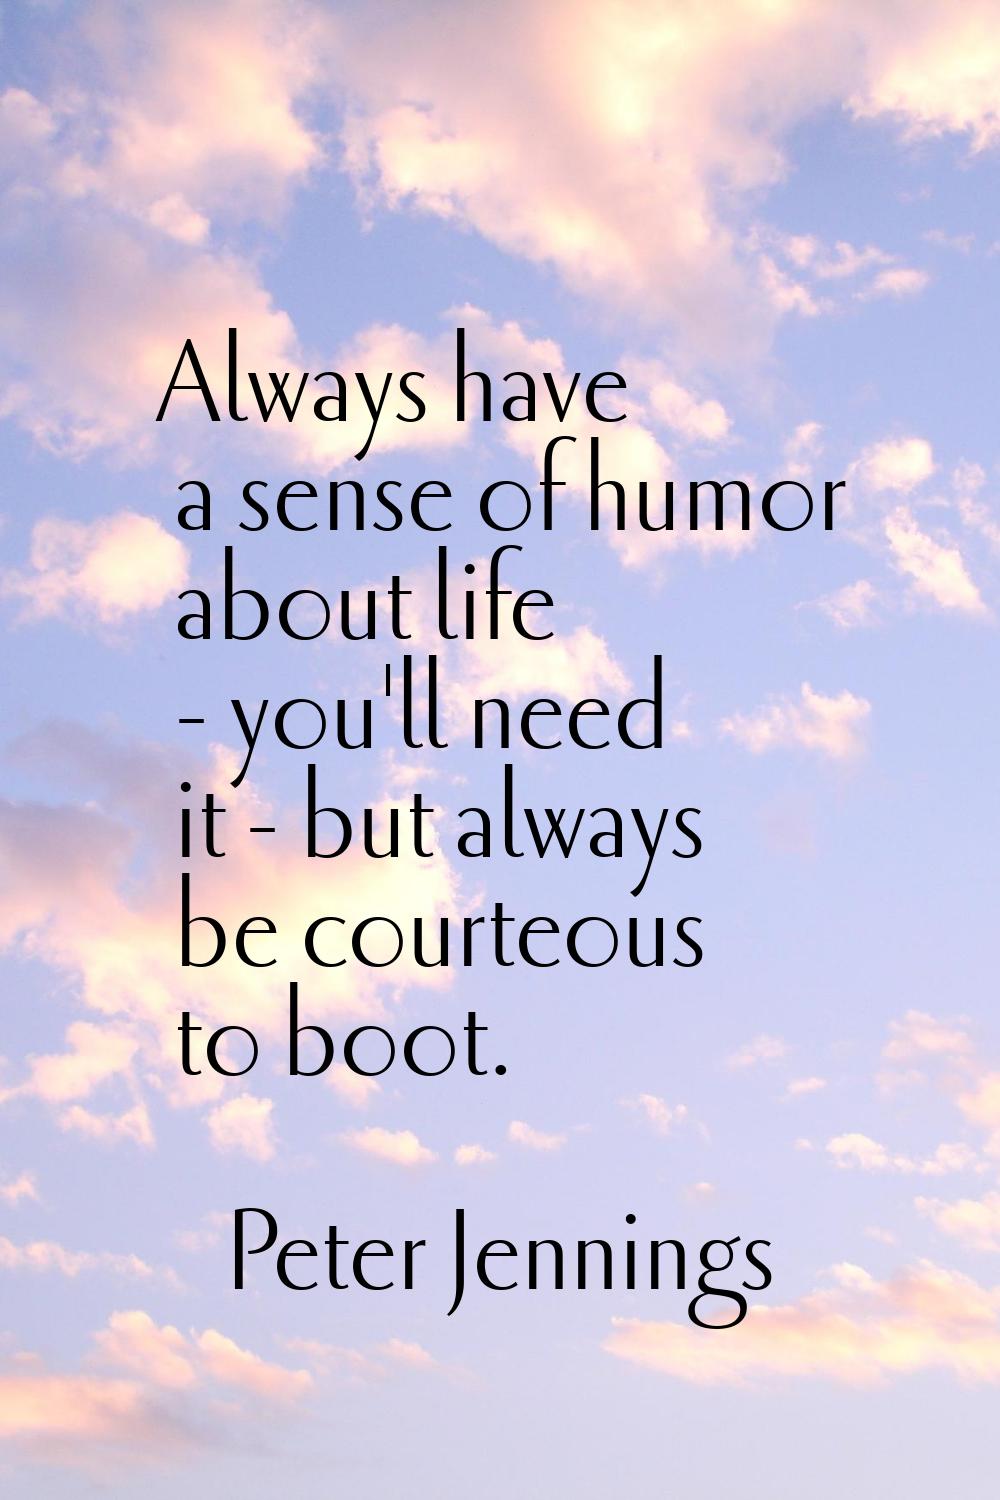 Always have a sense of humor about life - you'll need it - but always be courteous to boot.